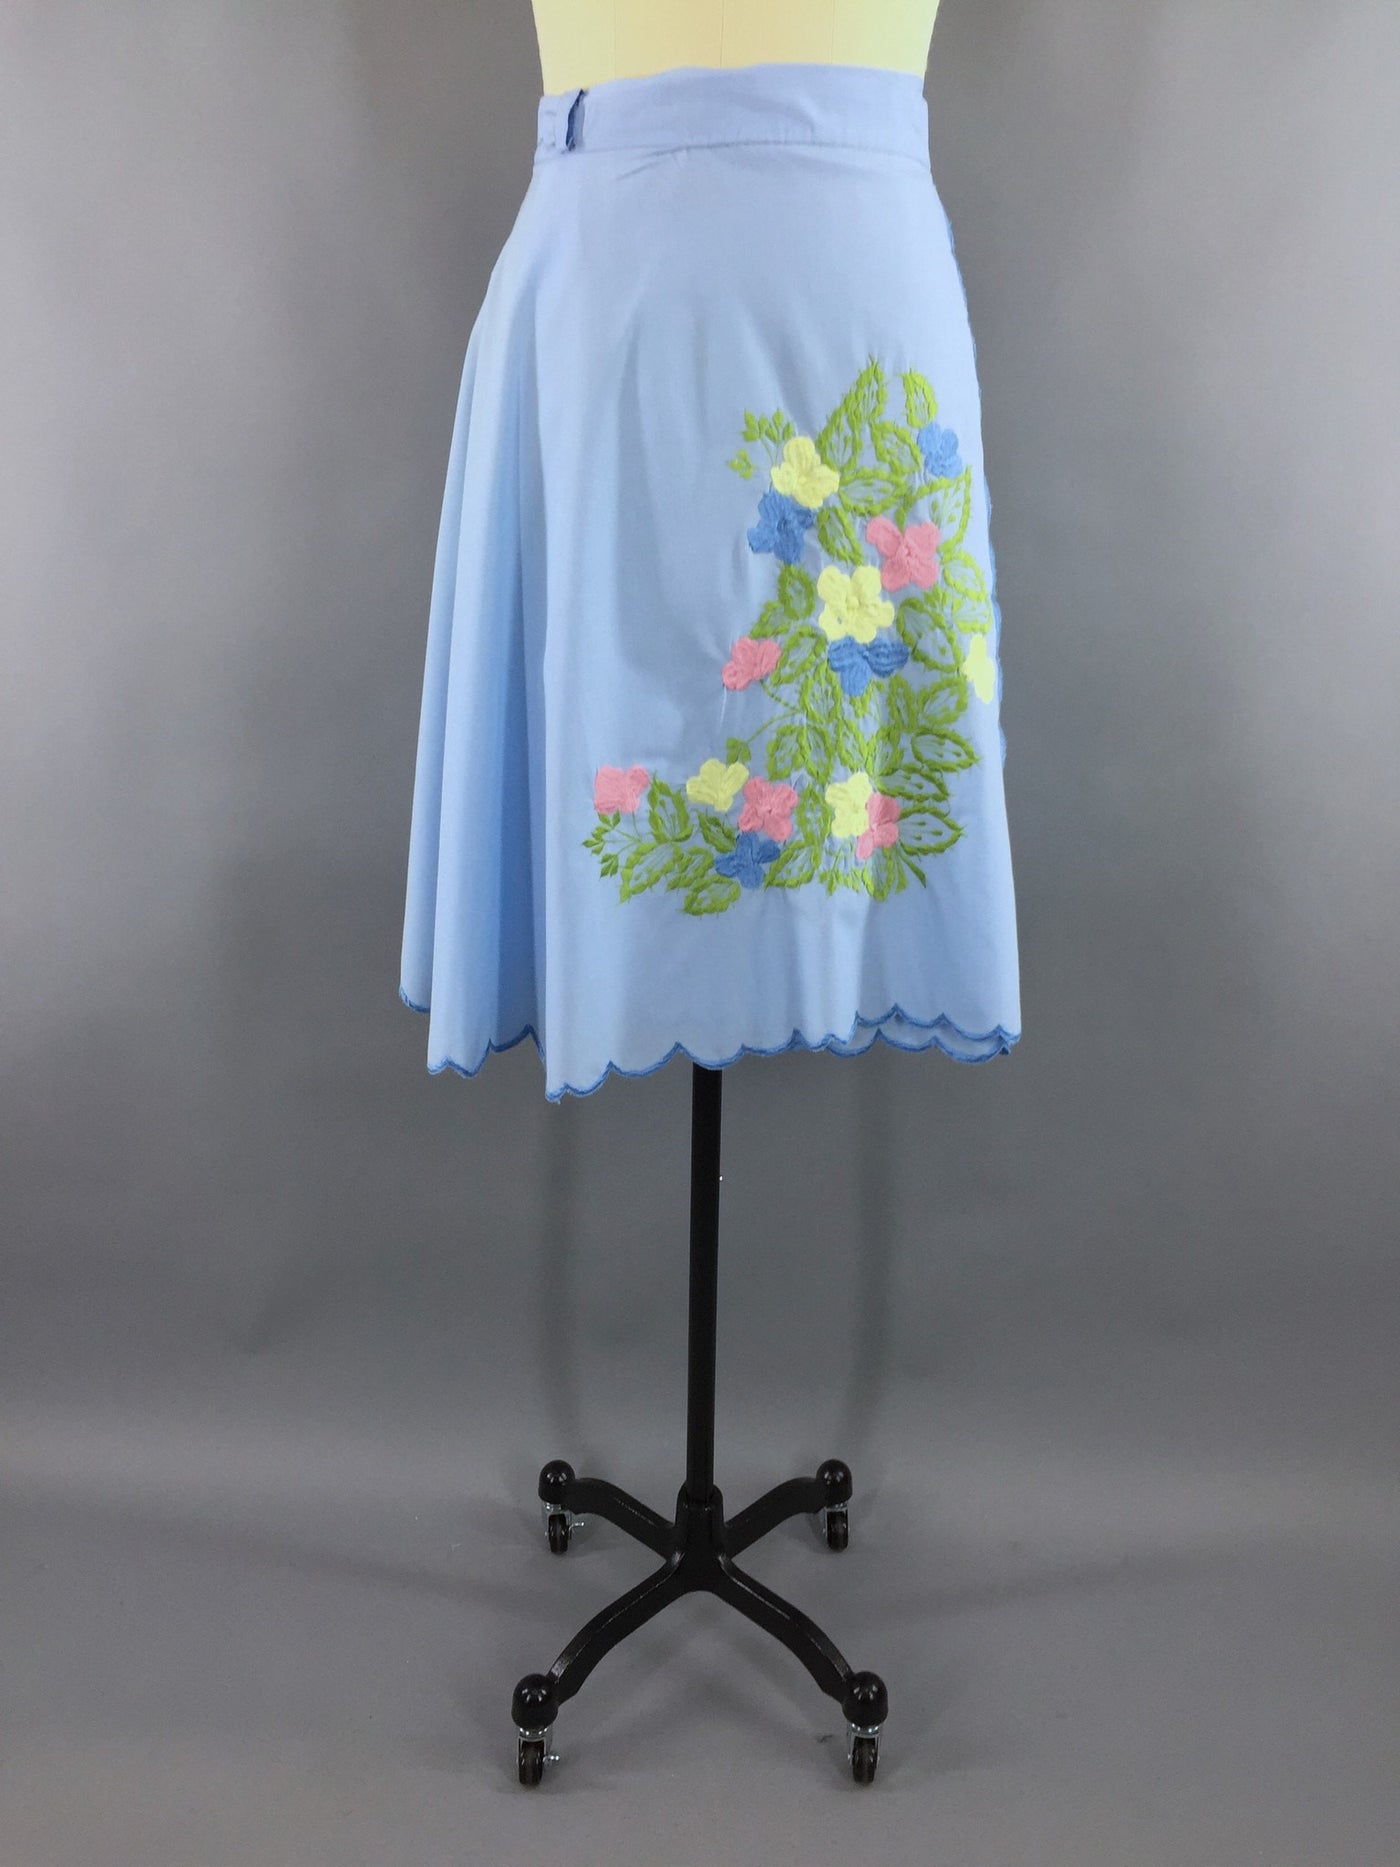 Vintage 1970s Wrap Skirt with Blue Floral Embroidery - ThisBlueBird